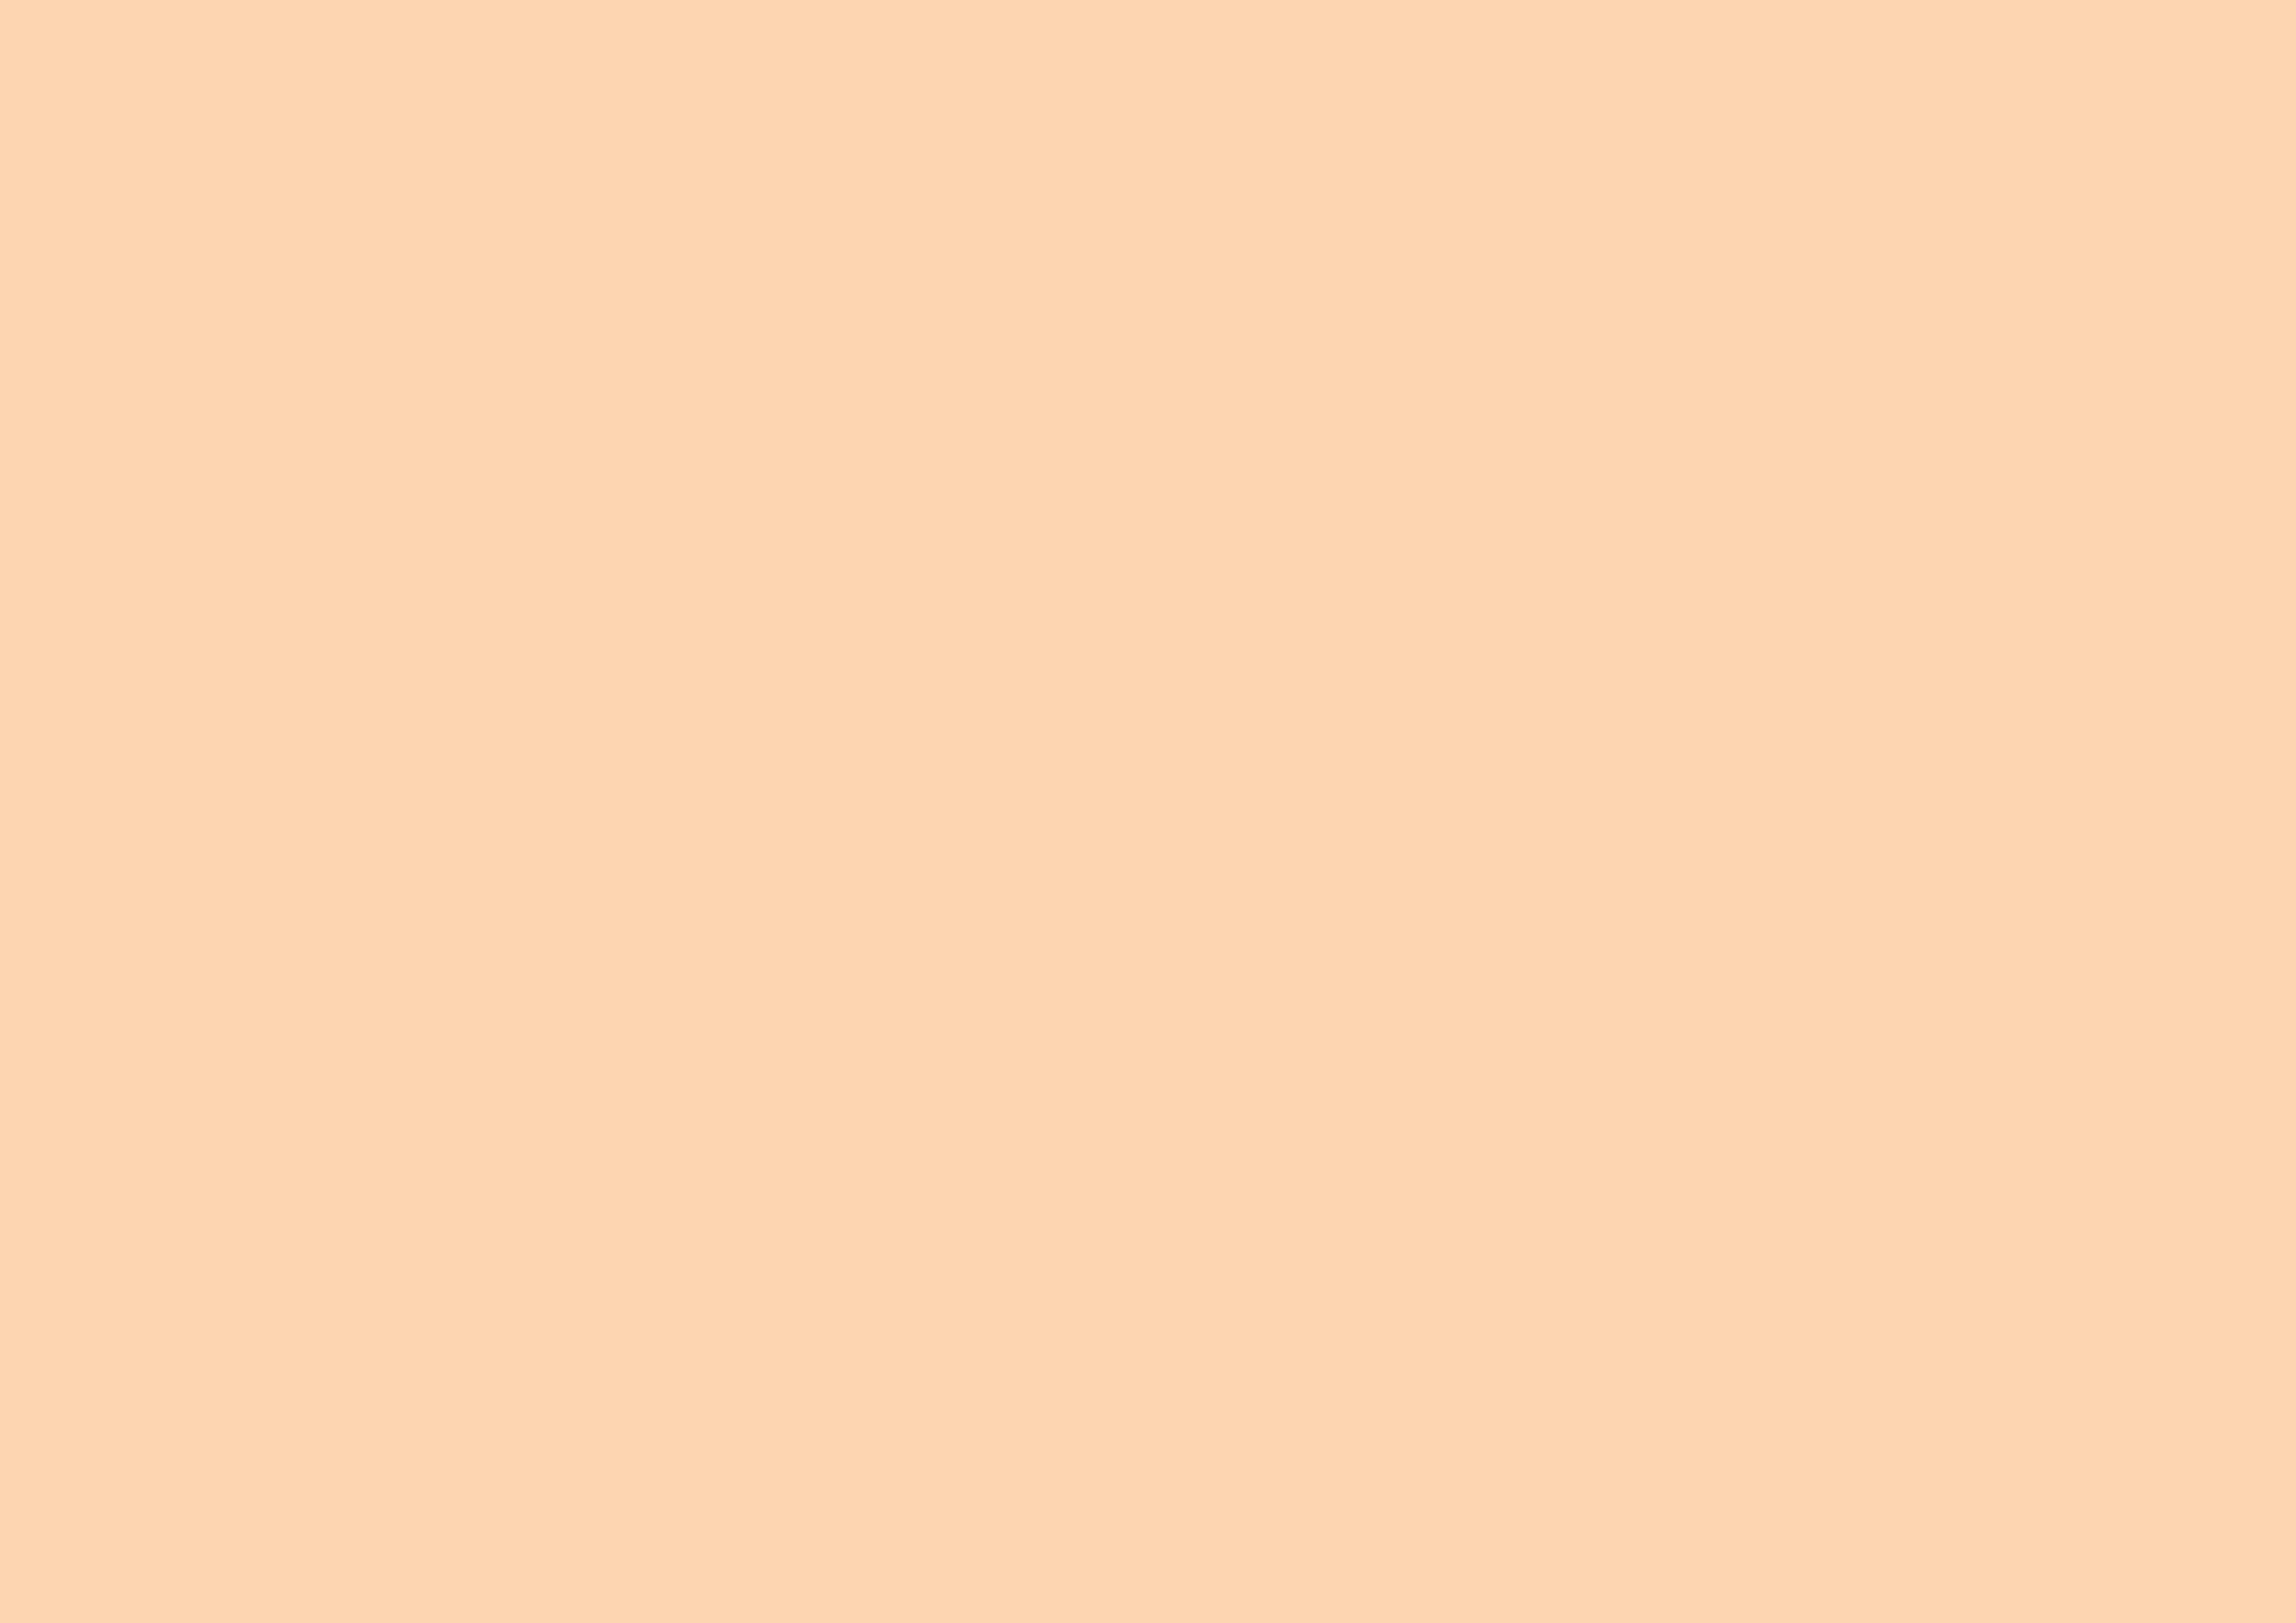 3508x2480 Light Apricot Solid Color Background